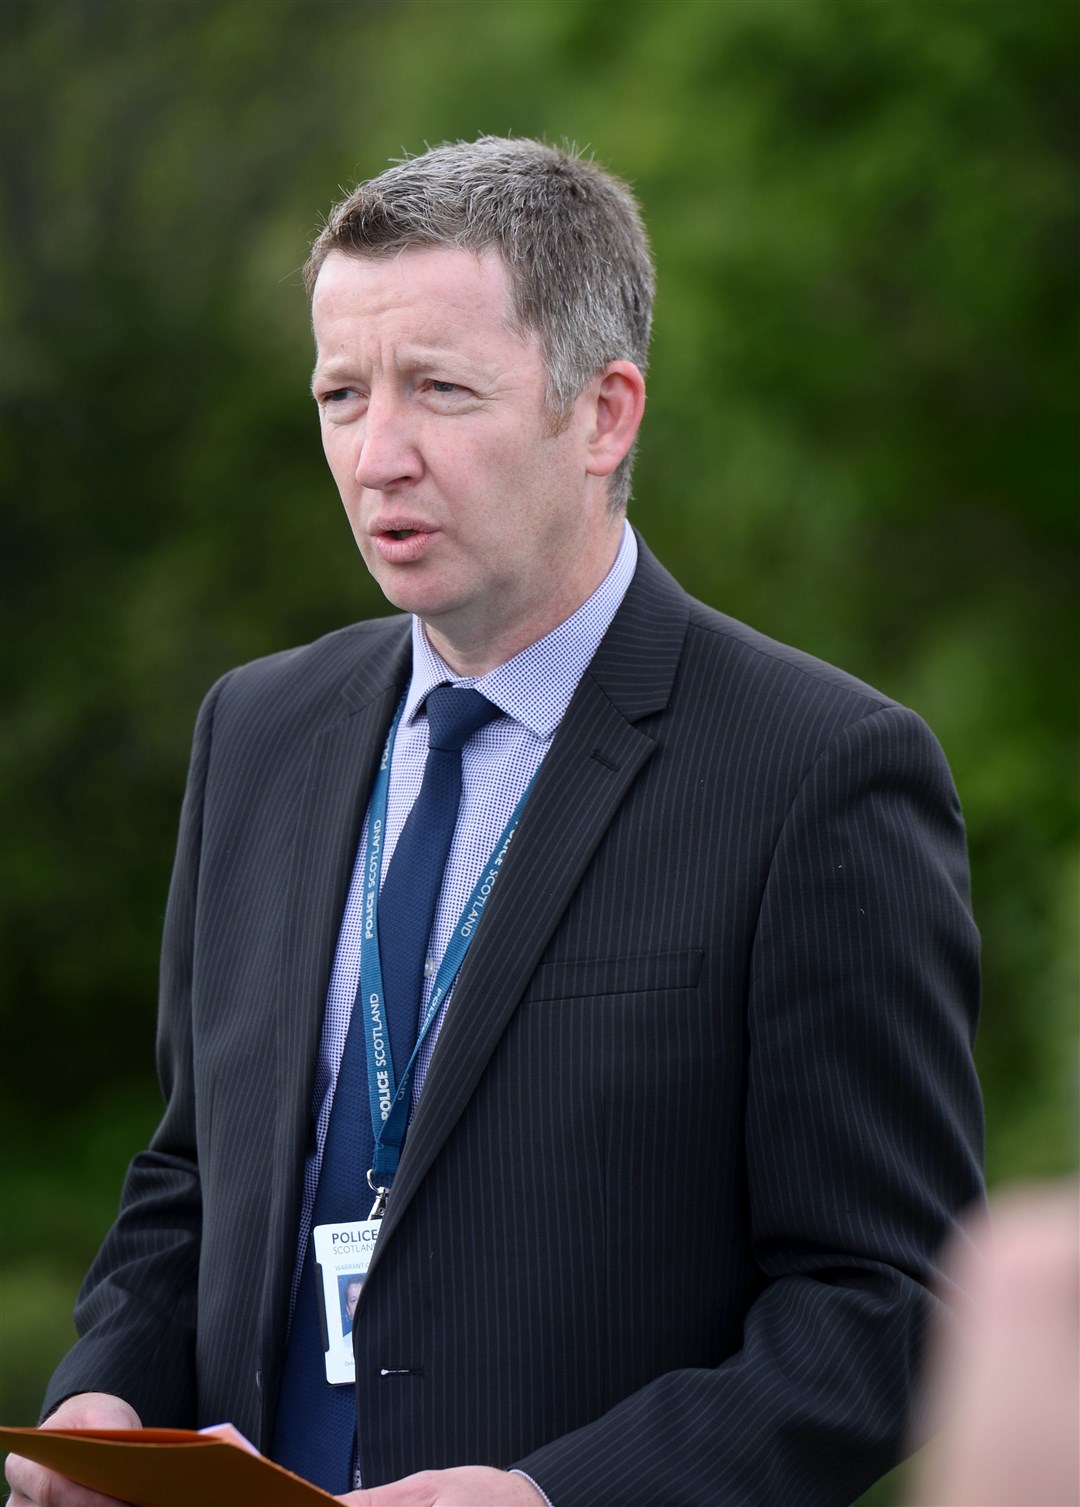 Senior investigating officer Detective Inspector Brian Geddes back in 2018 during the re-launch of the cold case into Renee and Andrew MacRae's disappearance in 1976.